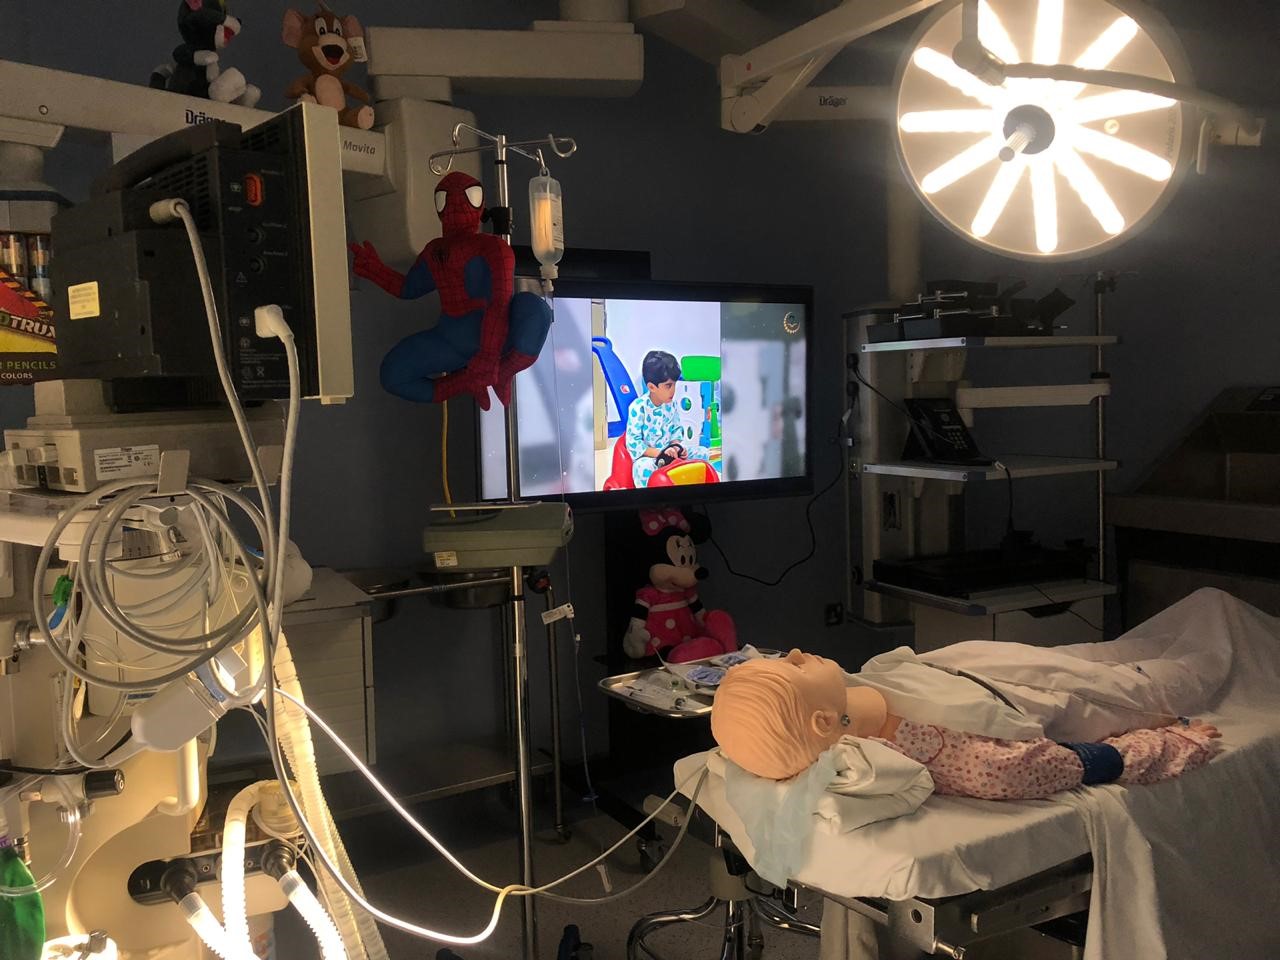 KFMC Breaks through Children's Fear of Operations by “Simulation Room”